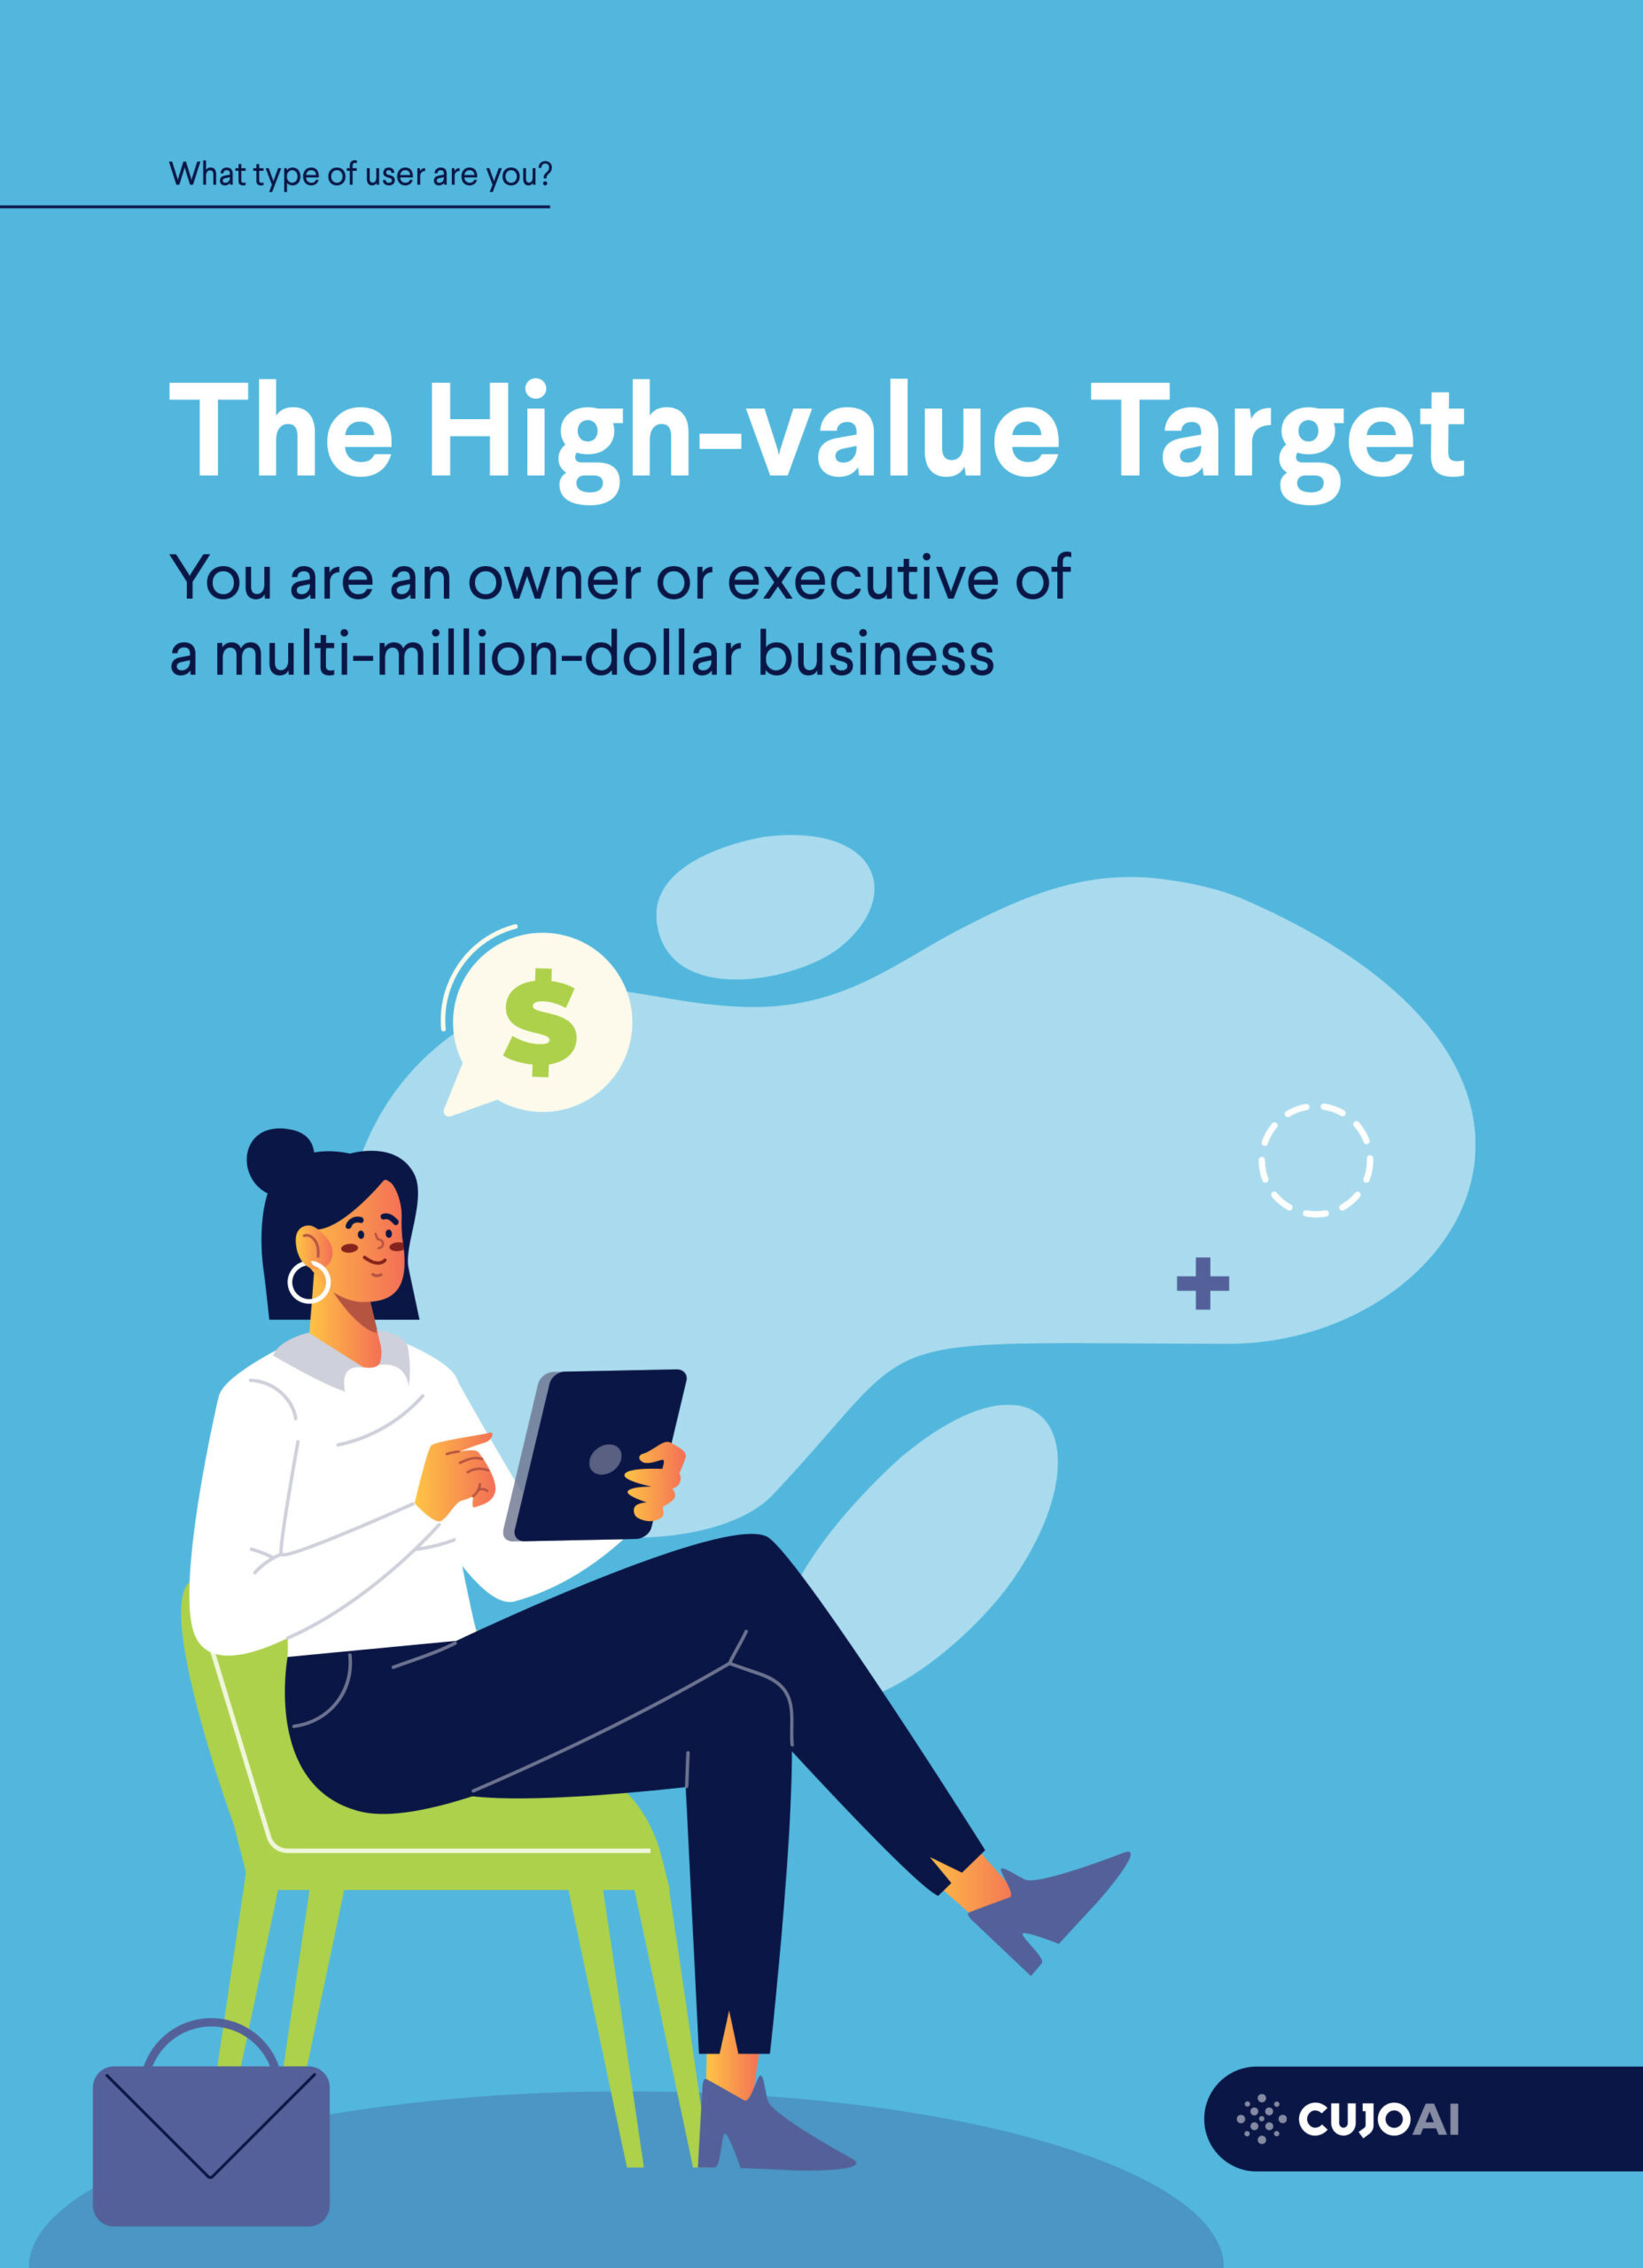 The high-value target